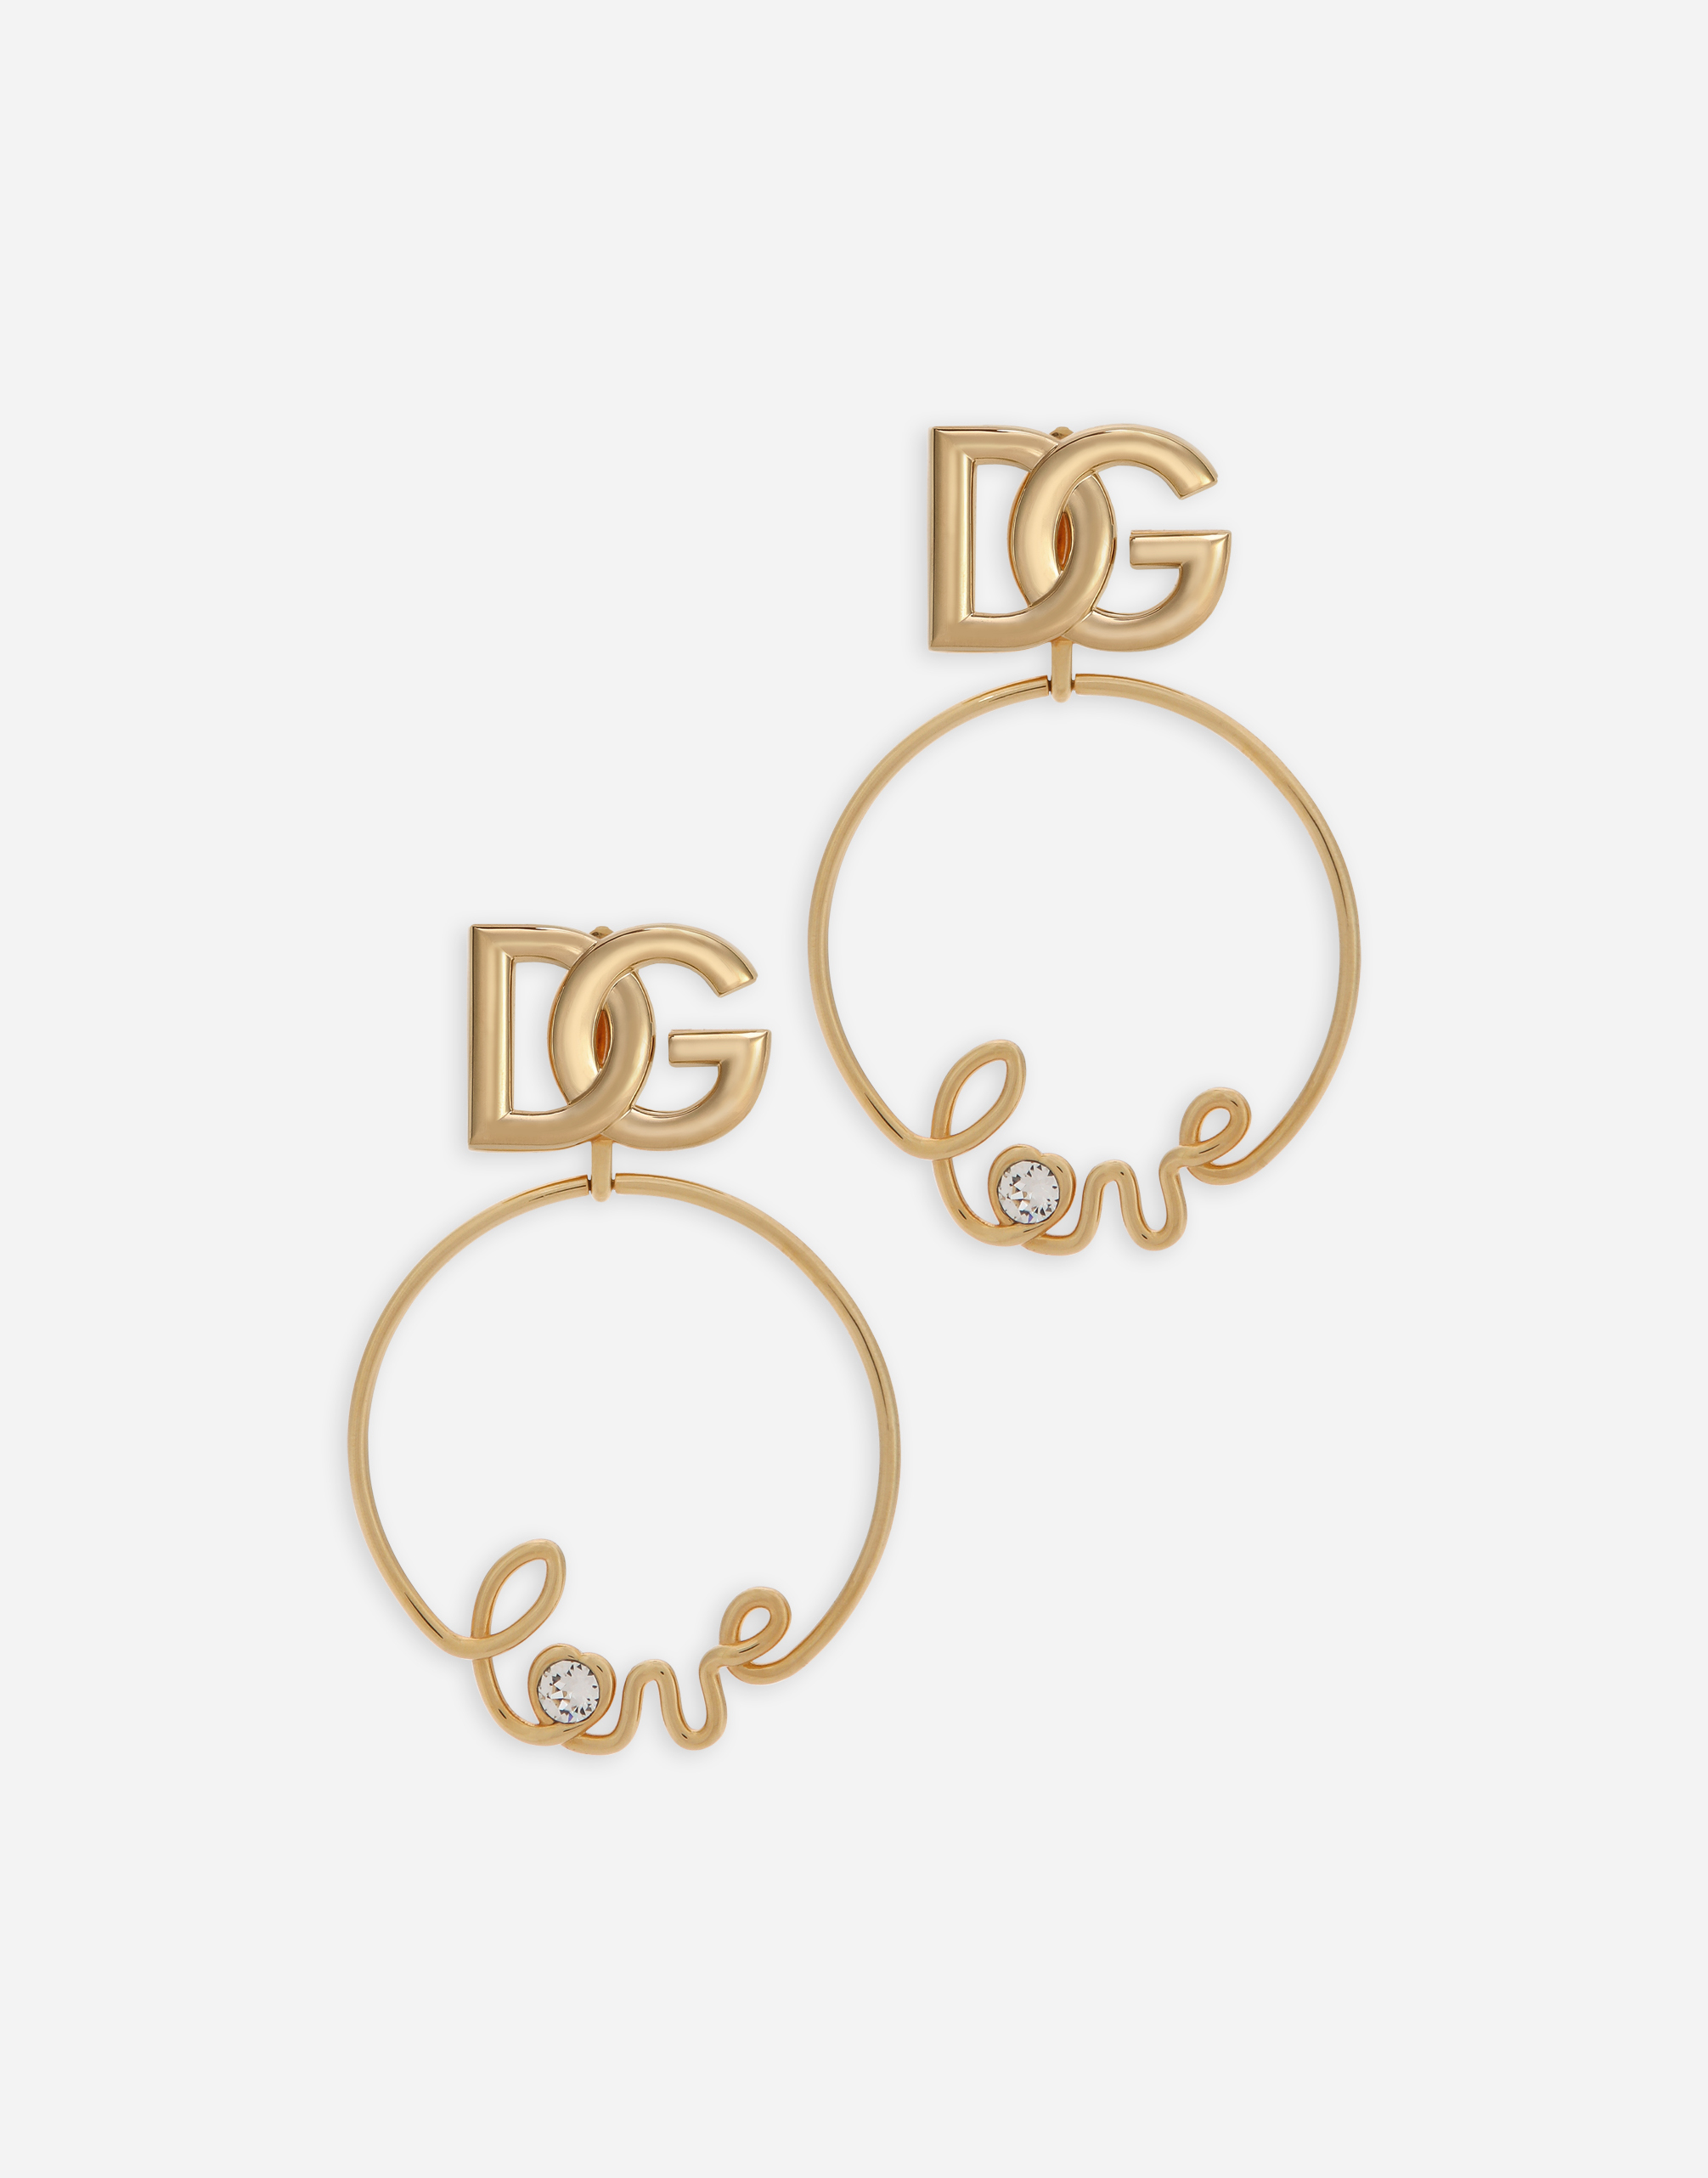 Clip-on “love” earrings with DG logo in Gold